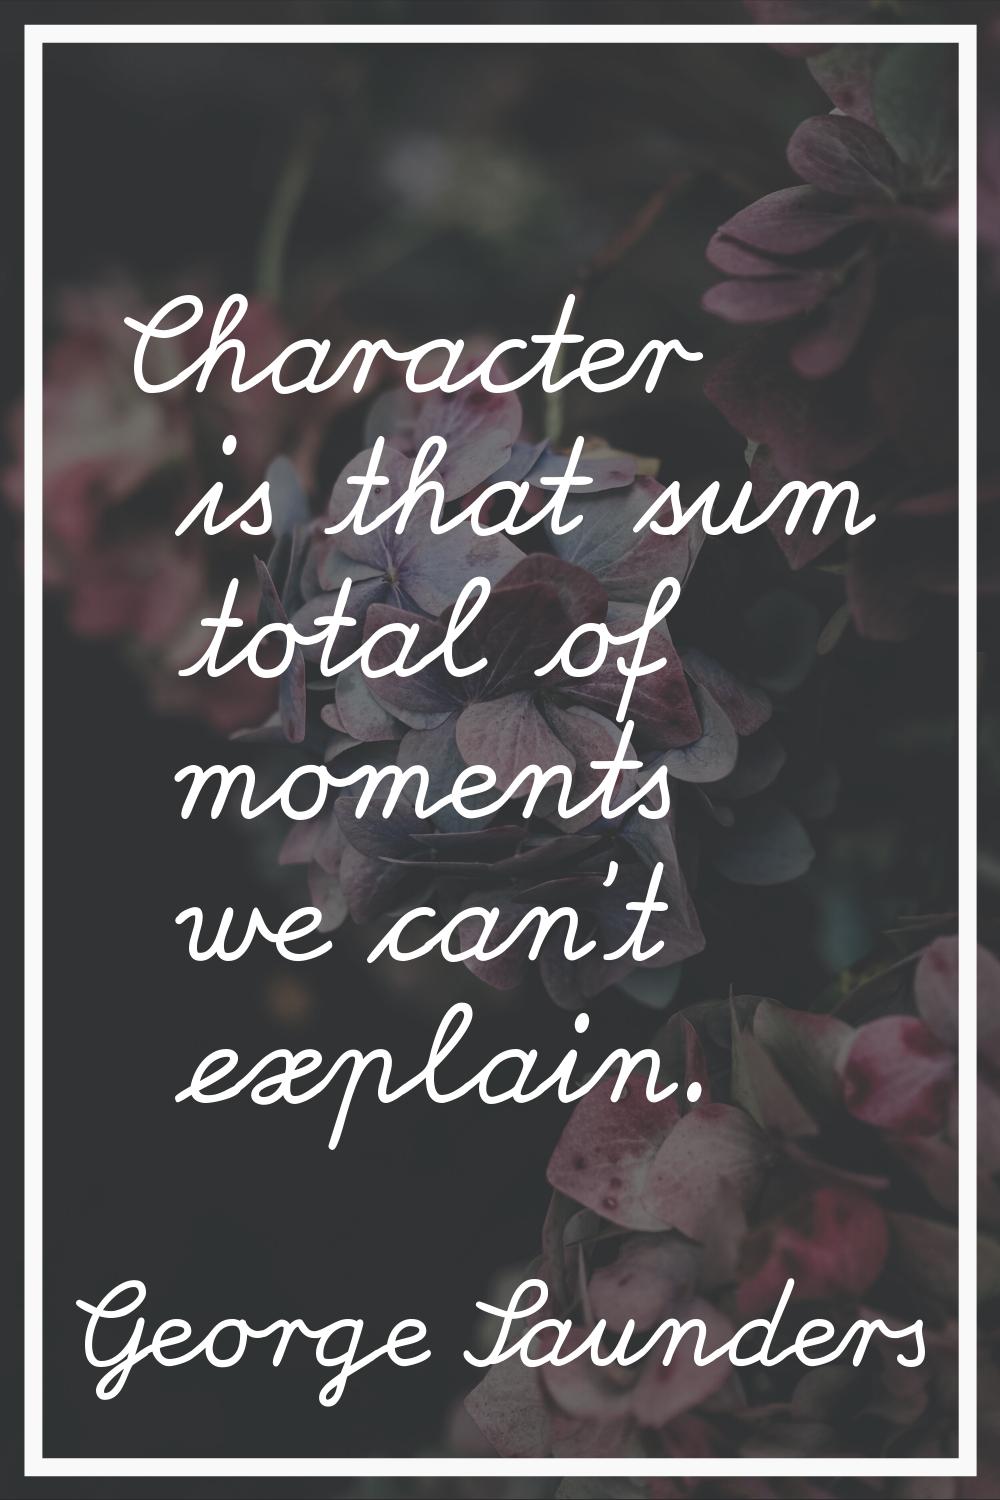 Character is that sum total of moments we can't explain.